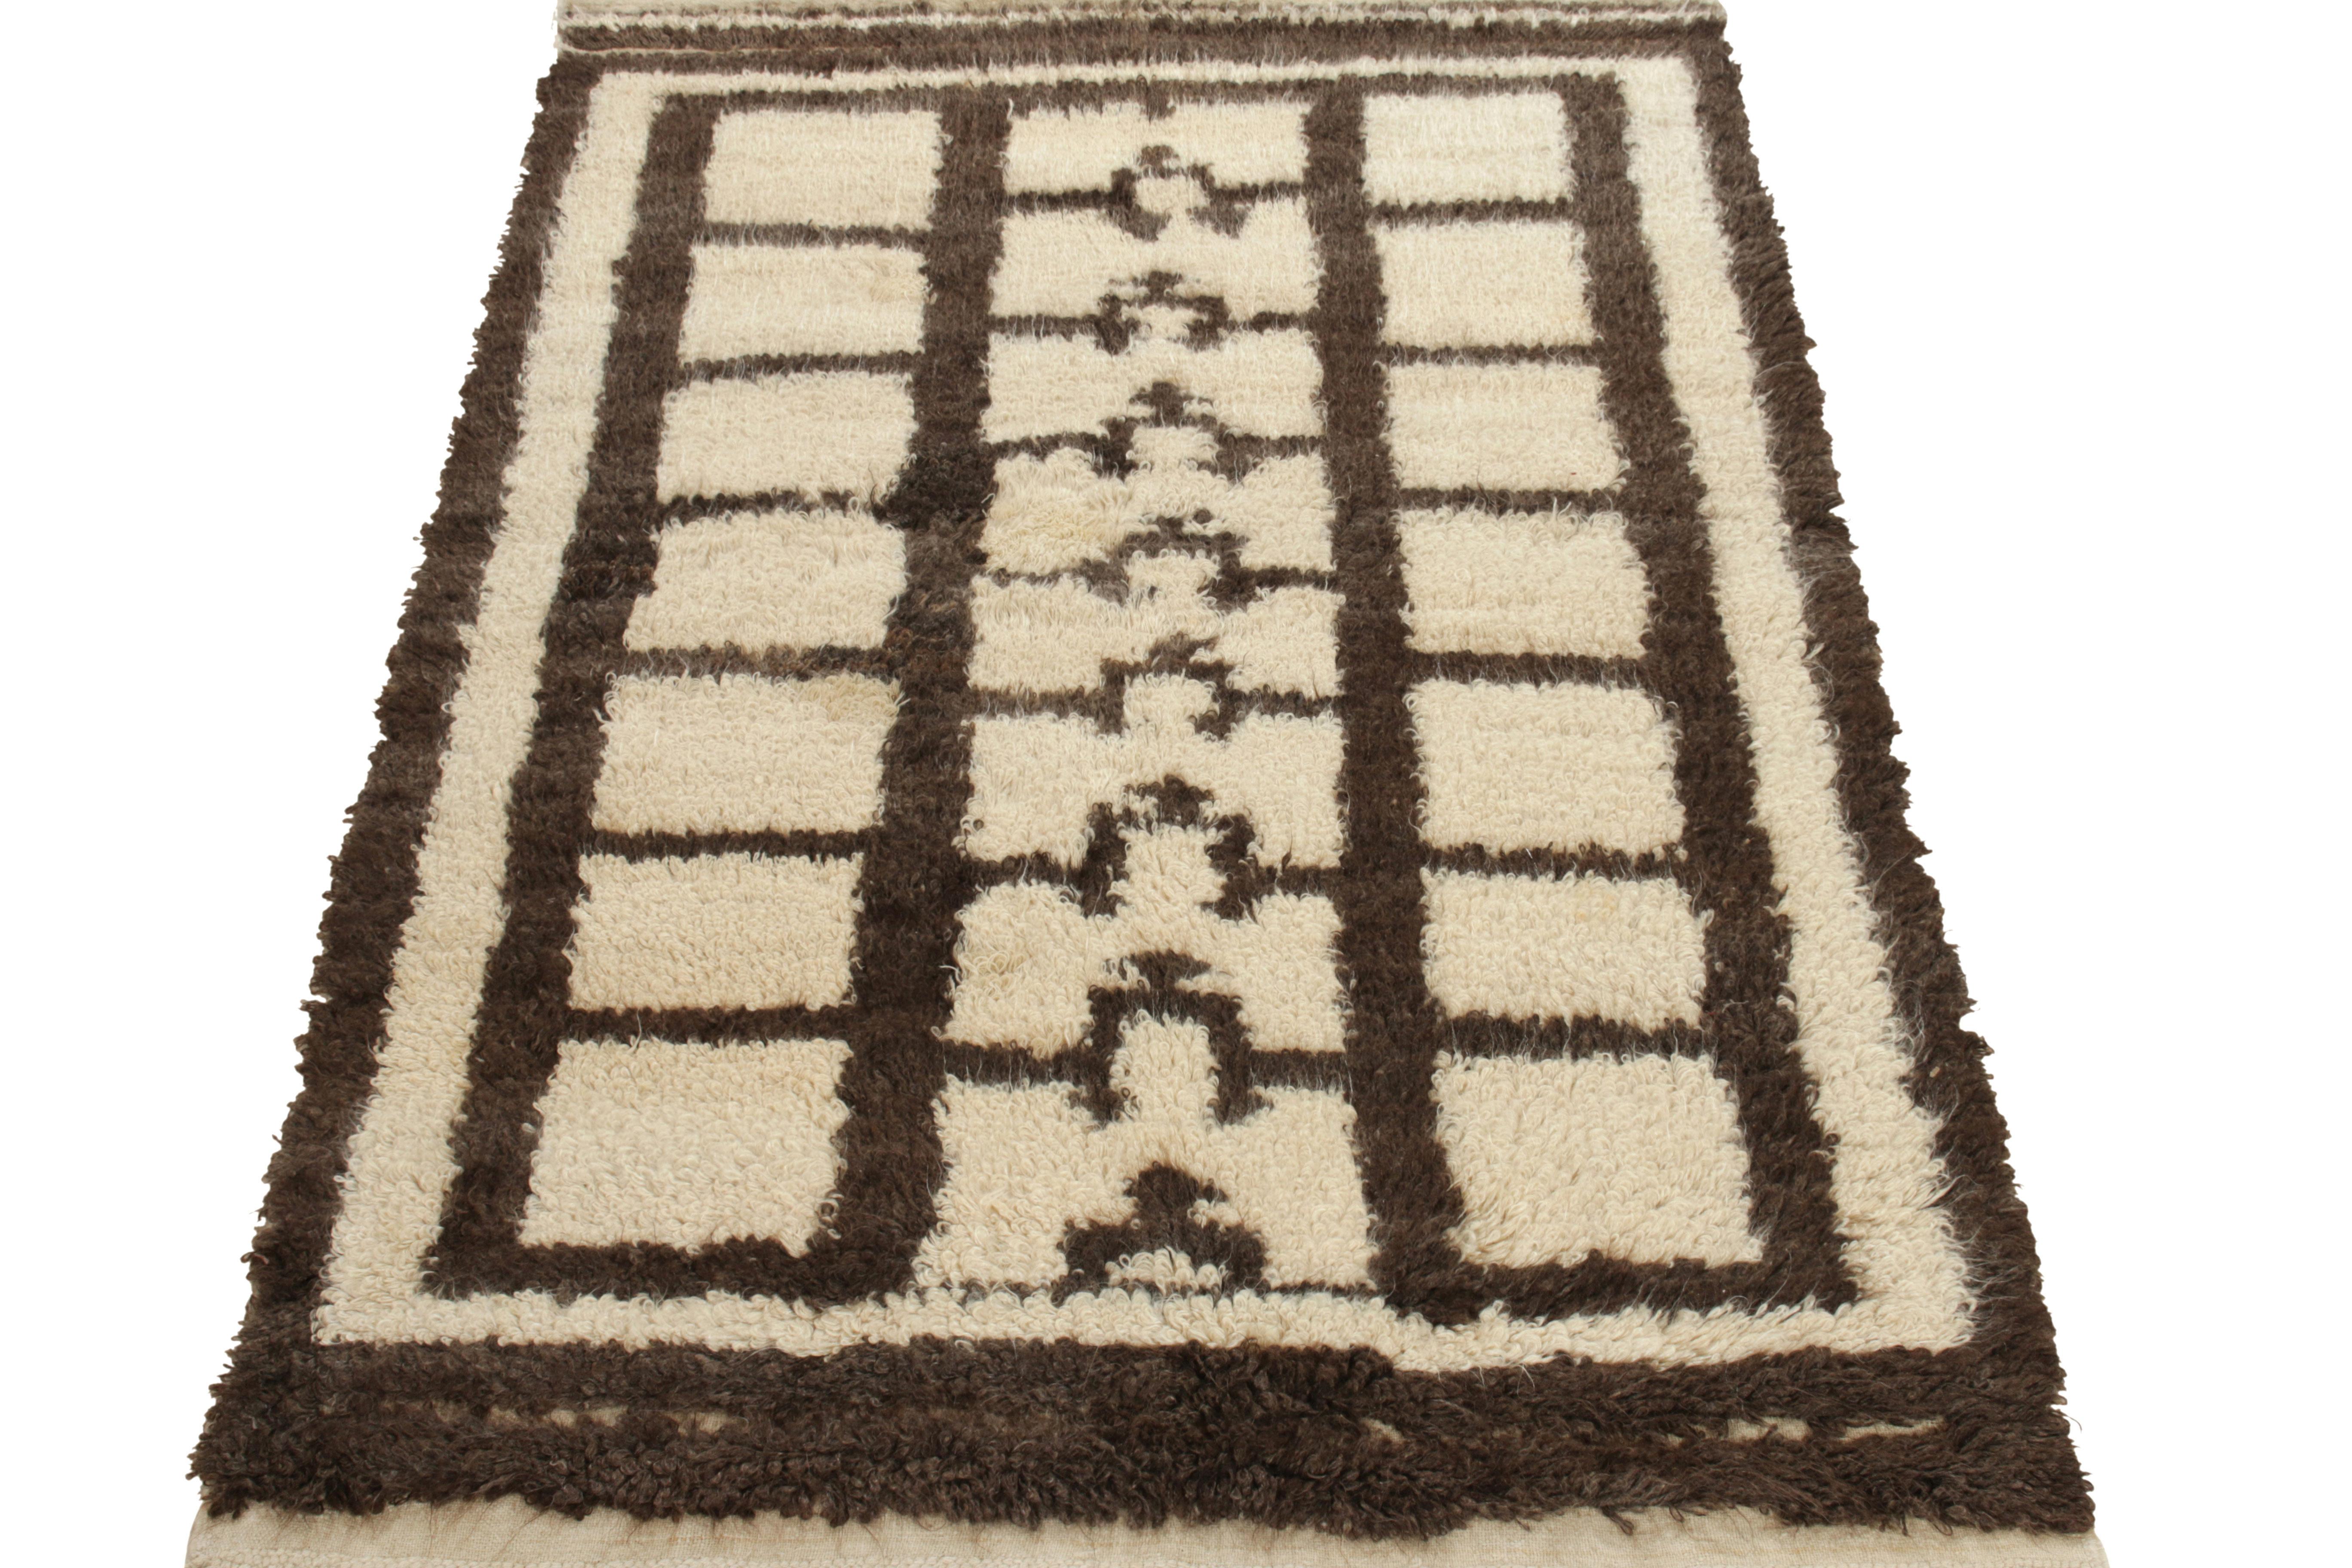 A 4X6 Tulu rug from Turkey entering rug & Kilim’s Antique & Vintage collection. The piece is hand-knotted in a fine wool shag pile with high low texturability on the border for enhancing the appeal of the tribal geometric pattern of the 1950s.